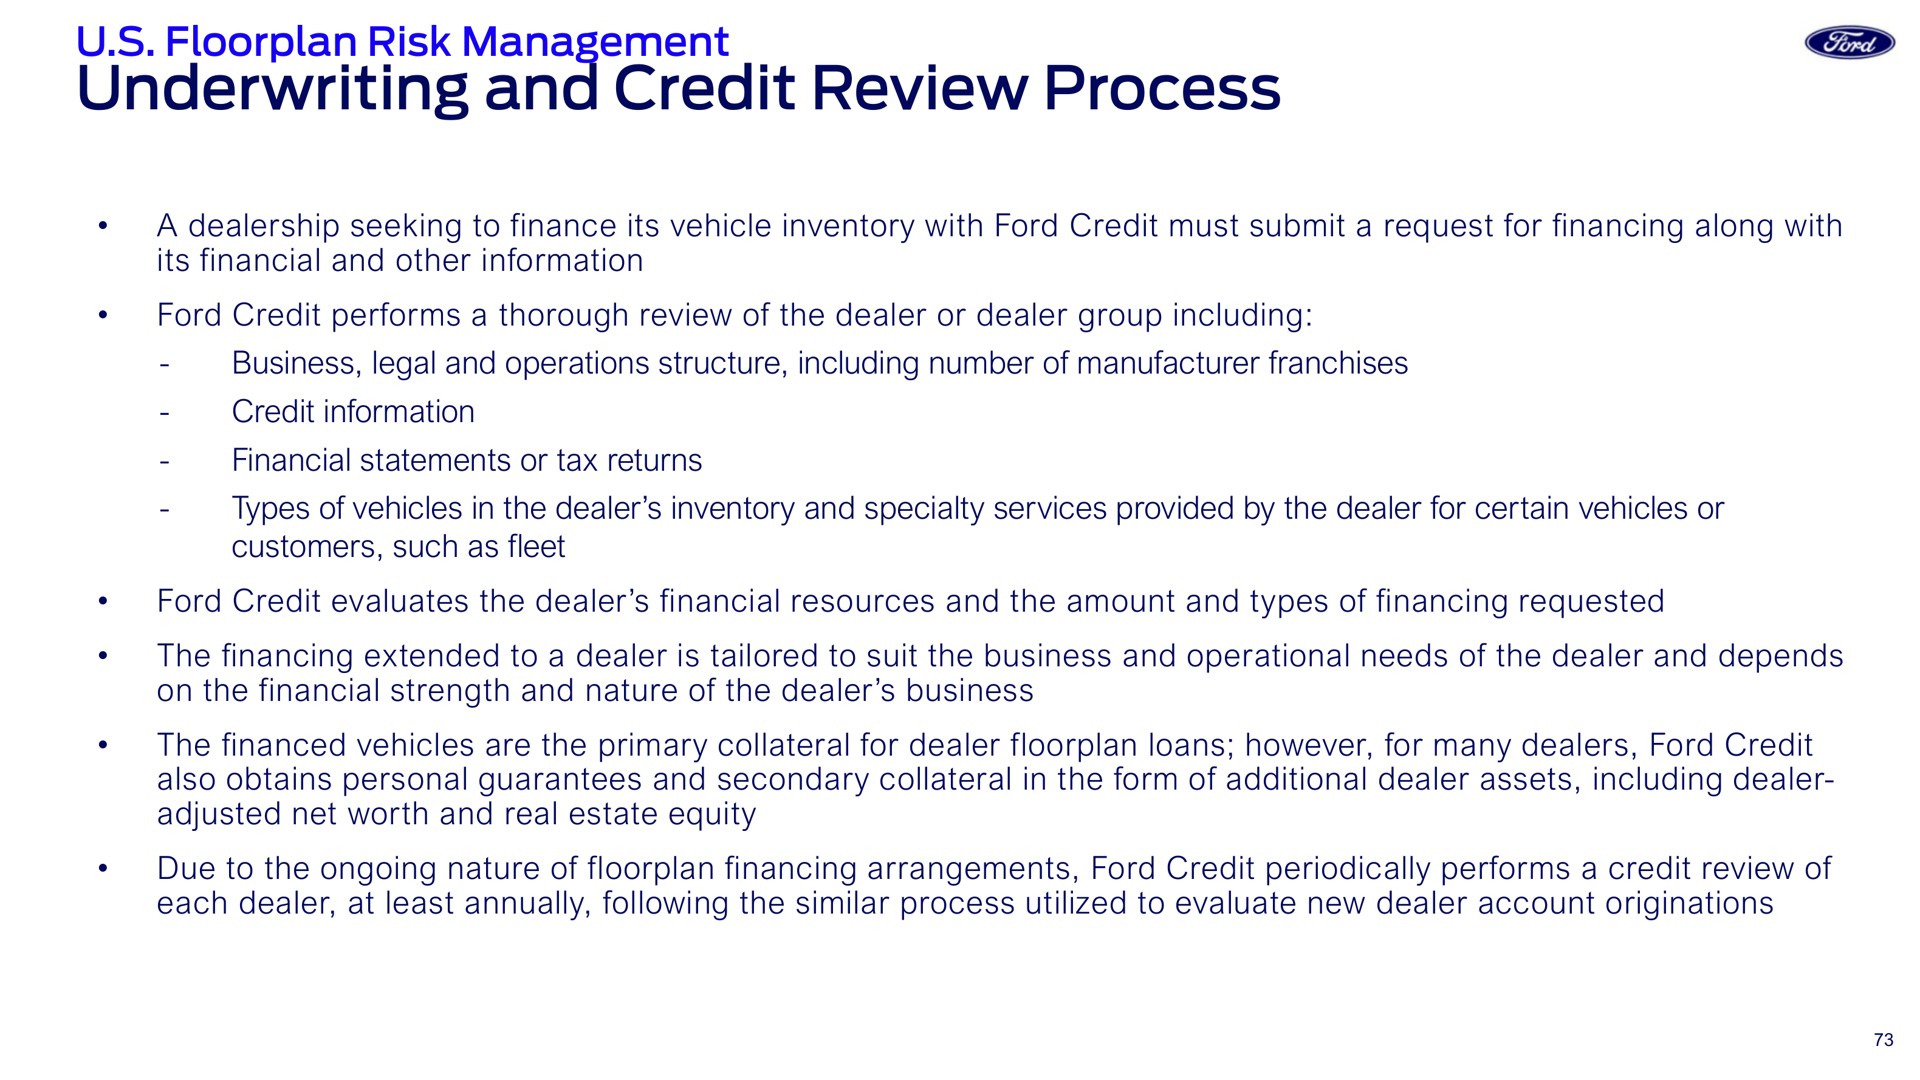 underwriting and credit review process | Ford Credit